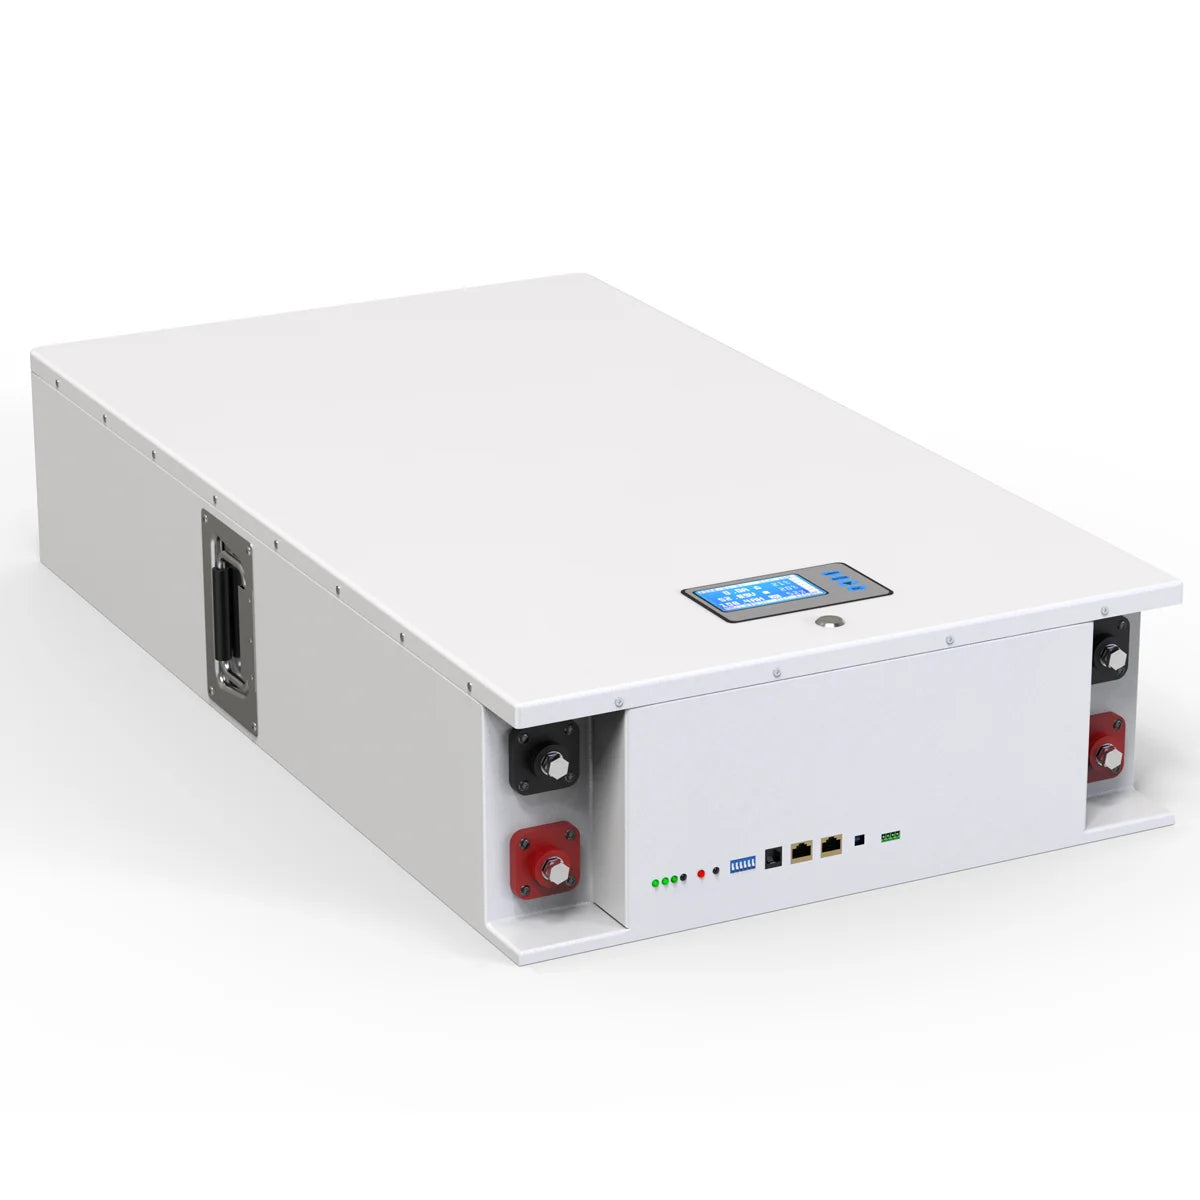 LiFePO4 48V 200AH Powerwall Battery, Monitor RS-485 signals, temperature, voltage, and battery data (SOC, SOH, cycle count, capacity) on a PC.